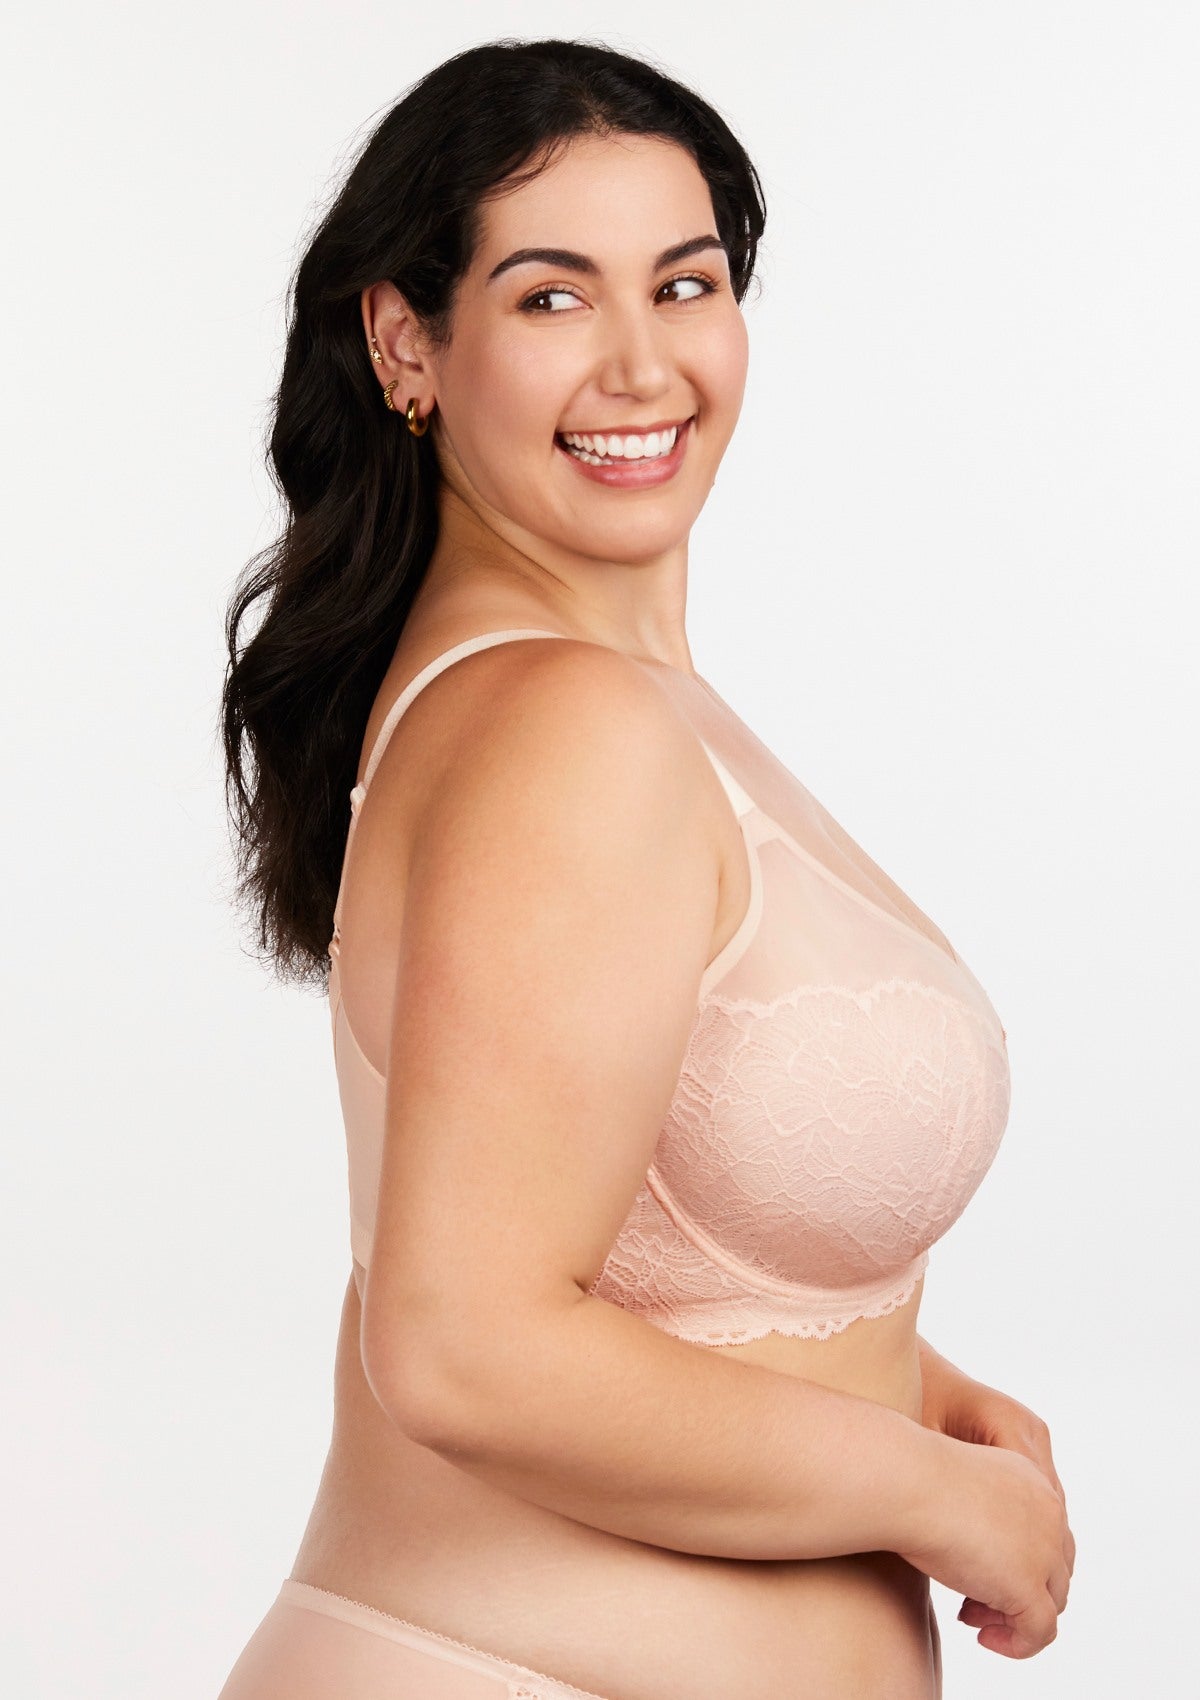 HSIA Blossom Sheer Lace Bra: Comfortable Underwire Bra For Big Busts - Dusty Peach / 40 / C